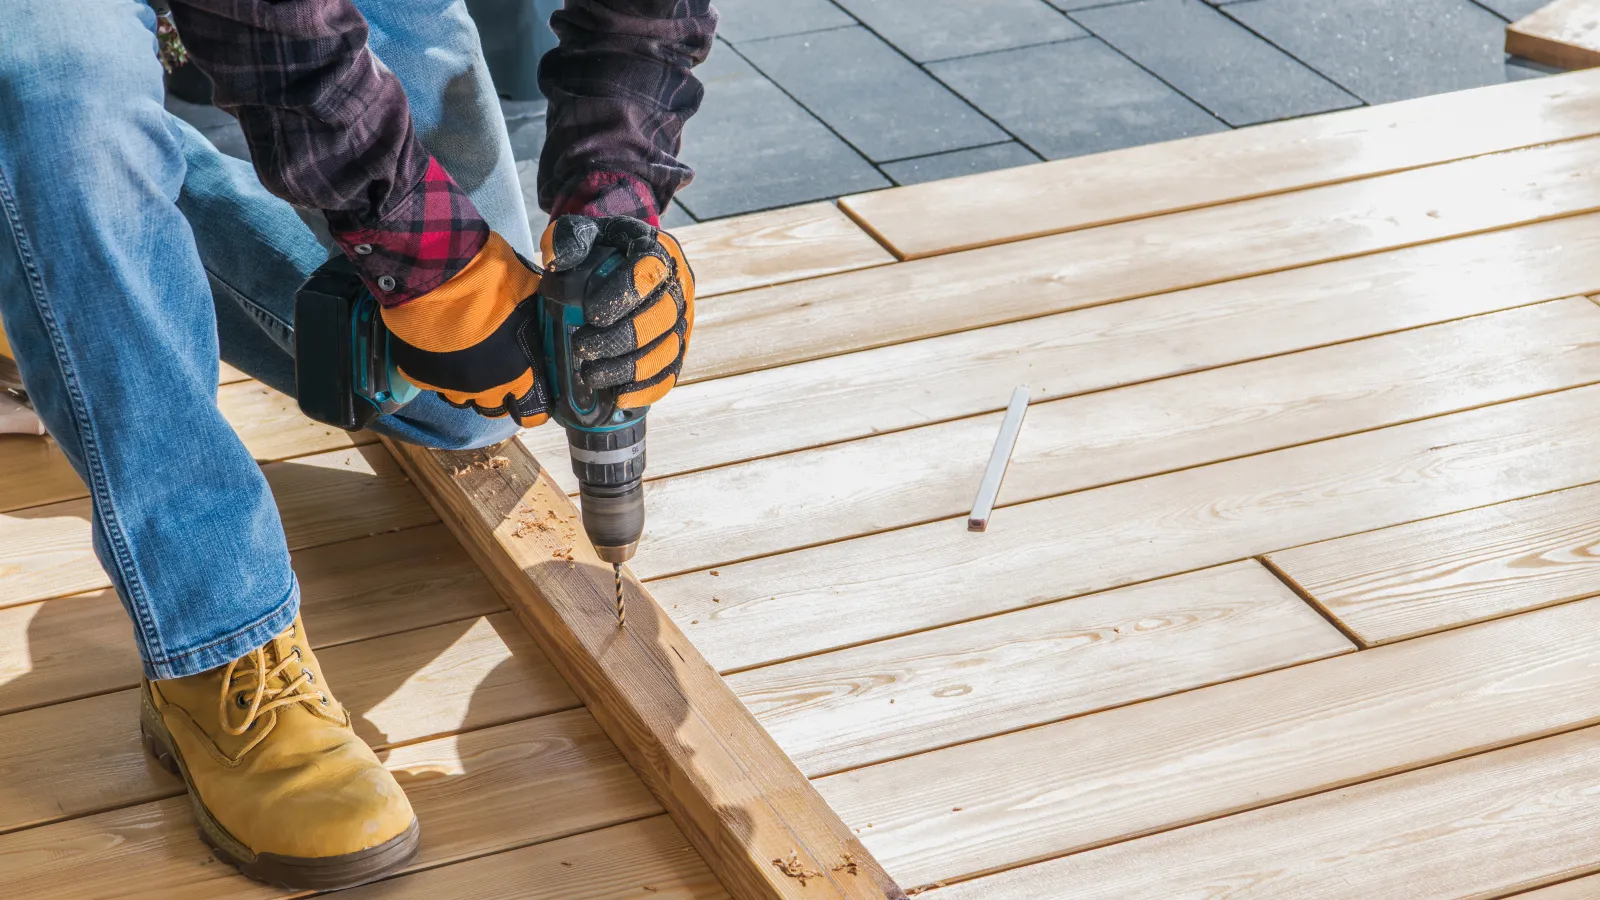 a person's legs on a wooden  deck Mission to Serve